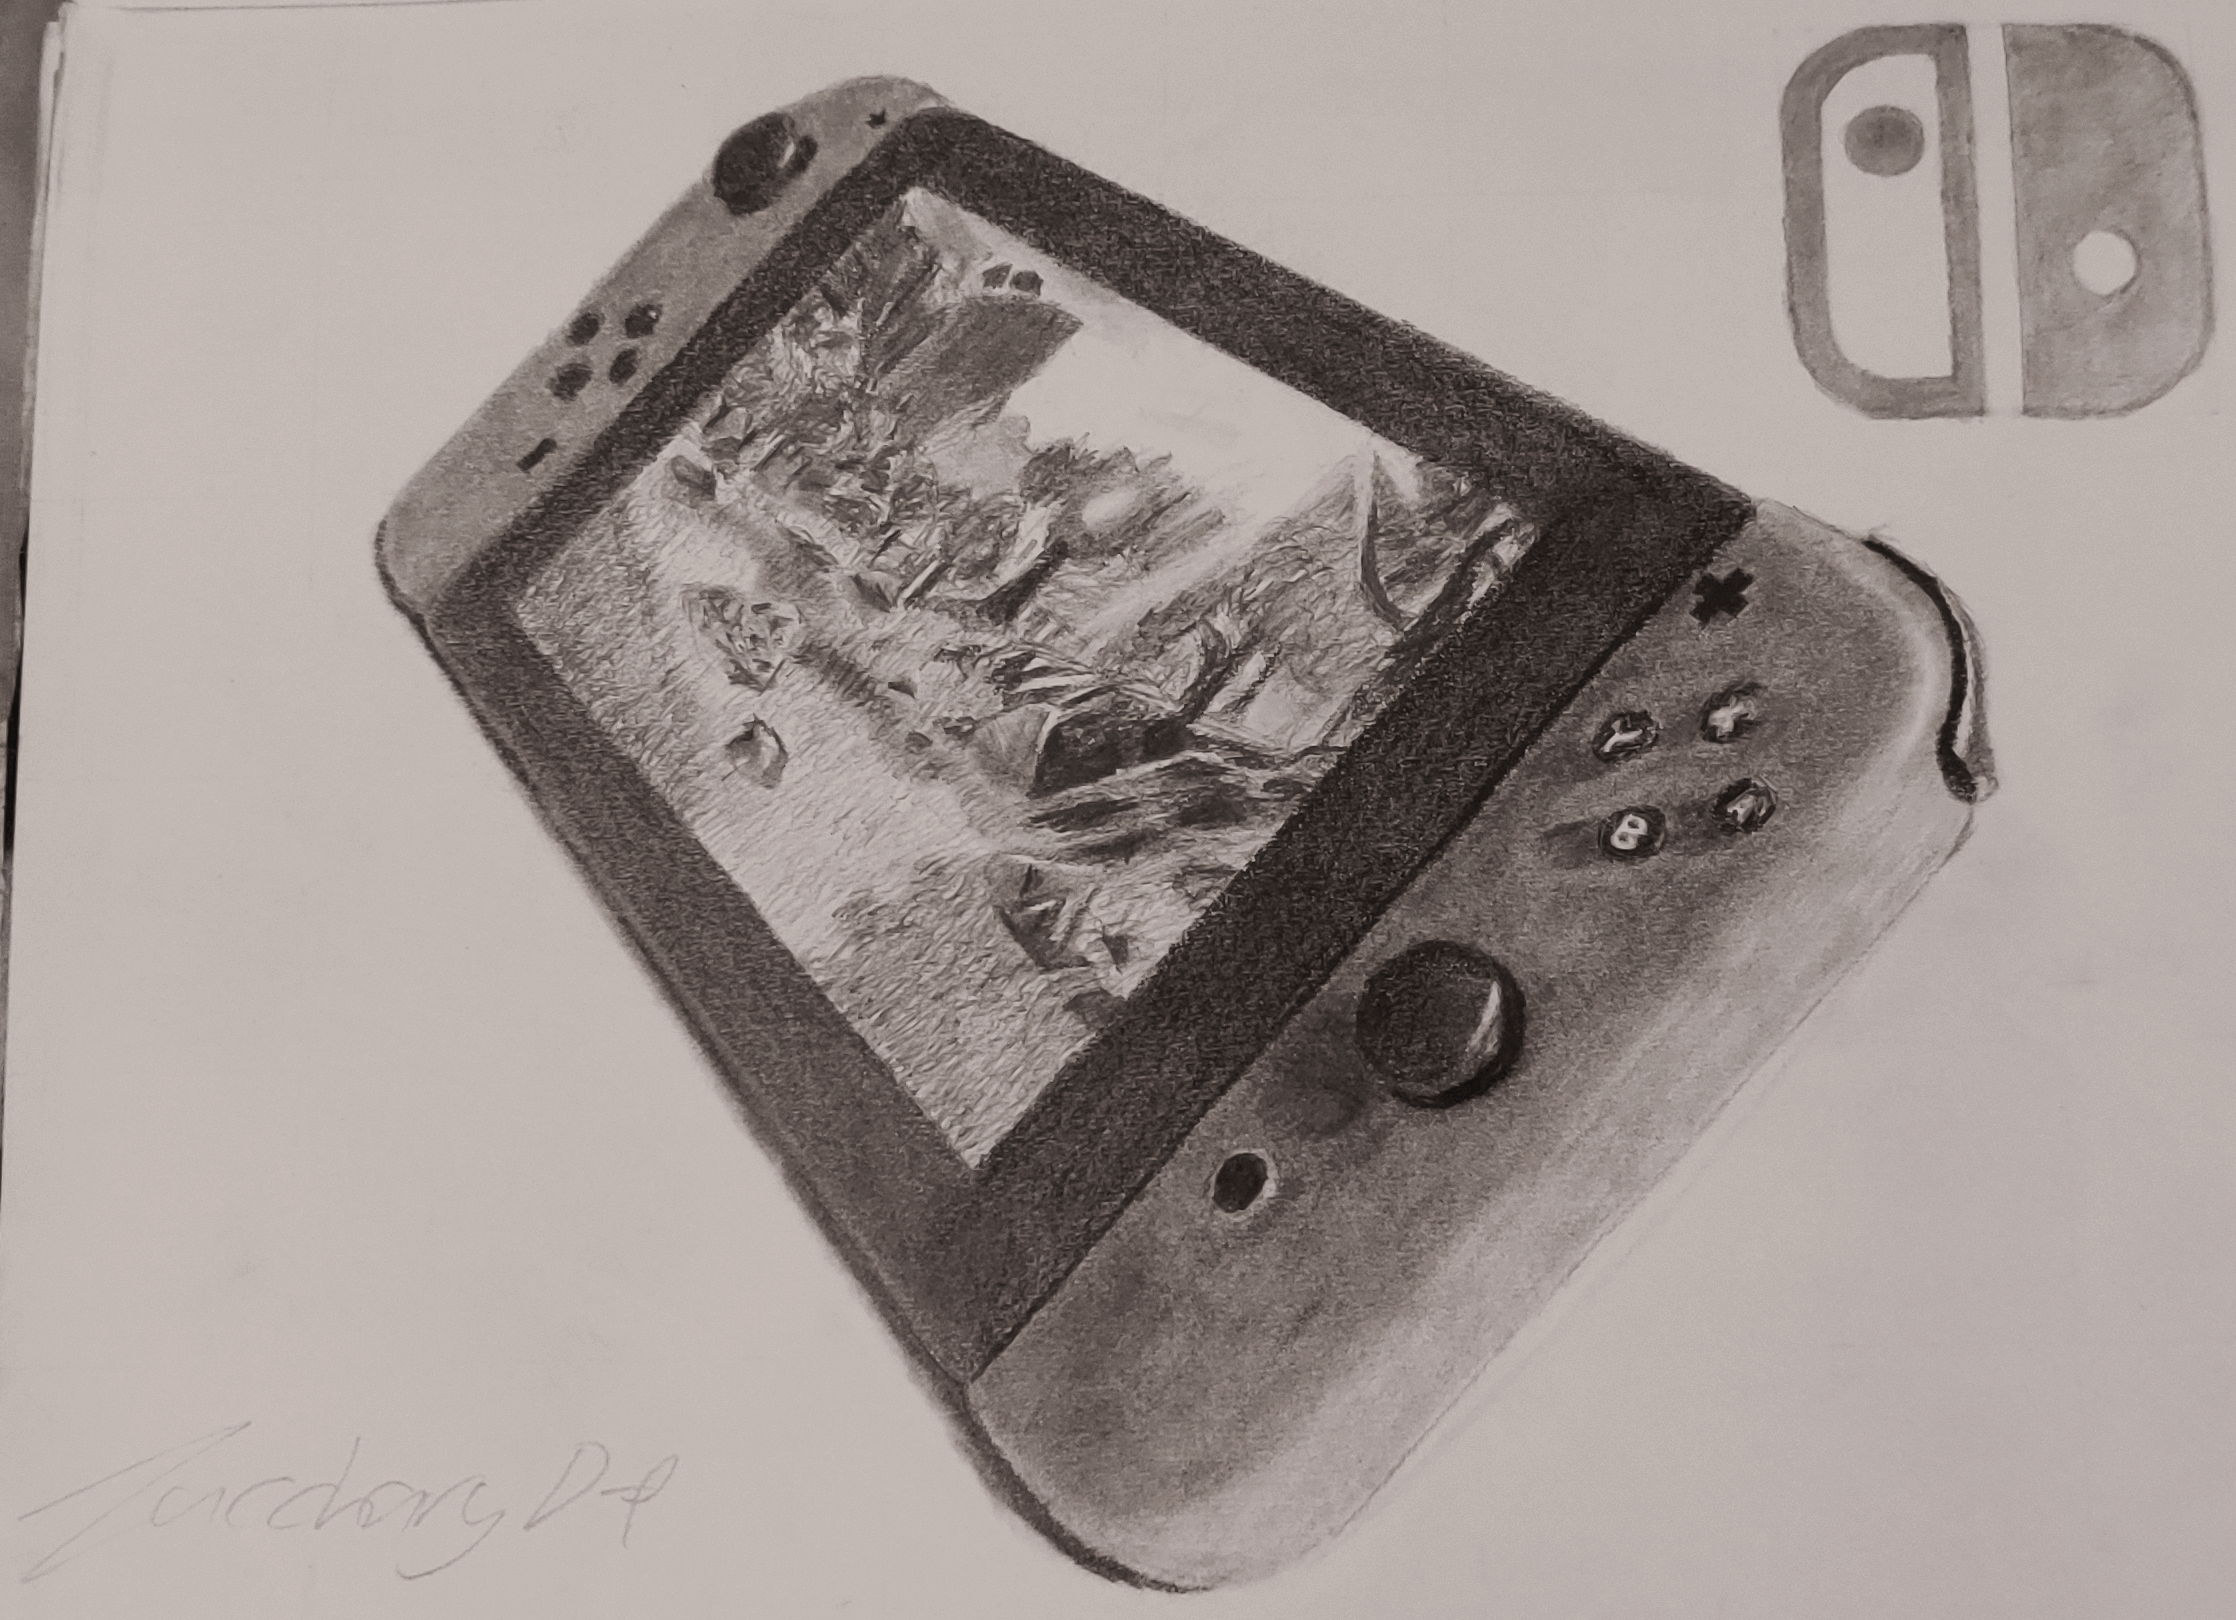 A perspective value drawing of a Nintendo Switch playing ‘The Legend of Zelda: Breath of the Wild’.